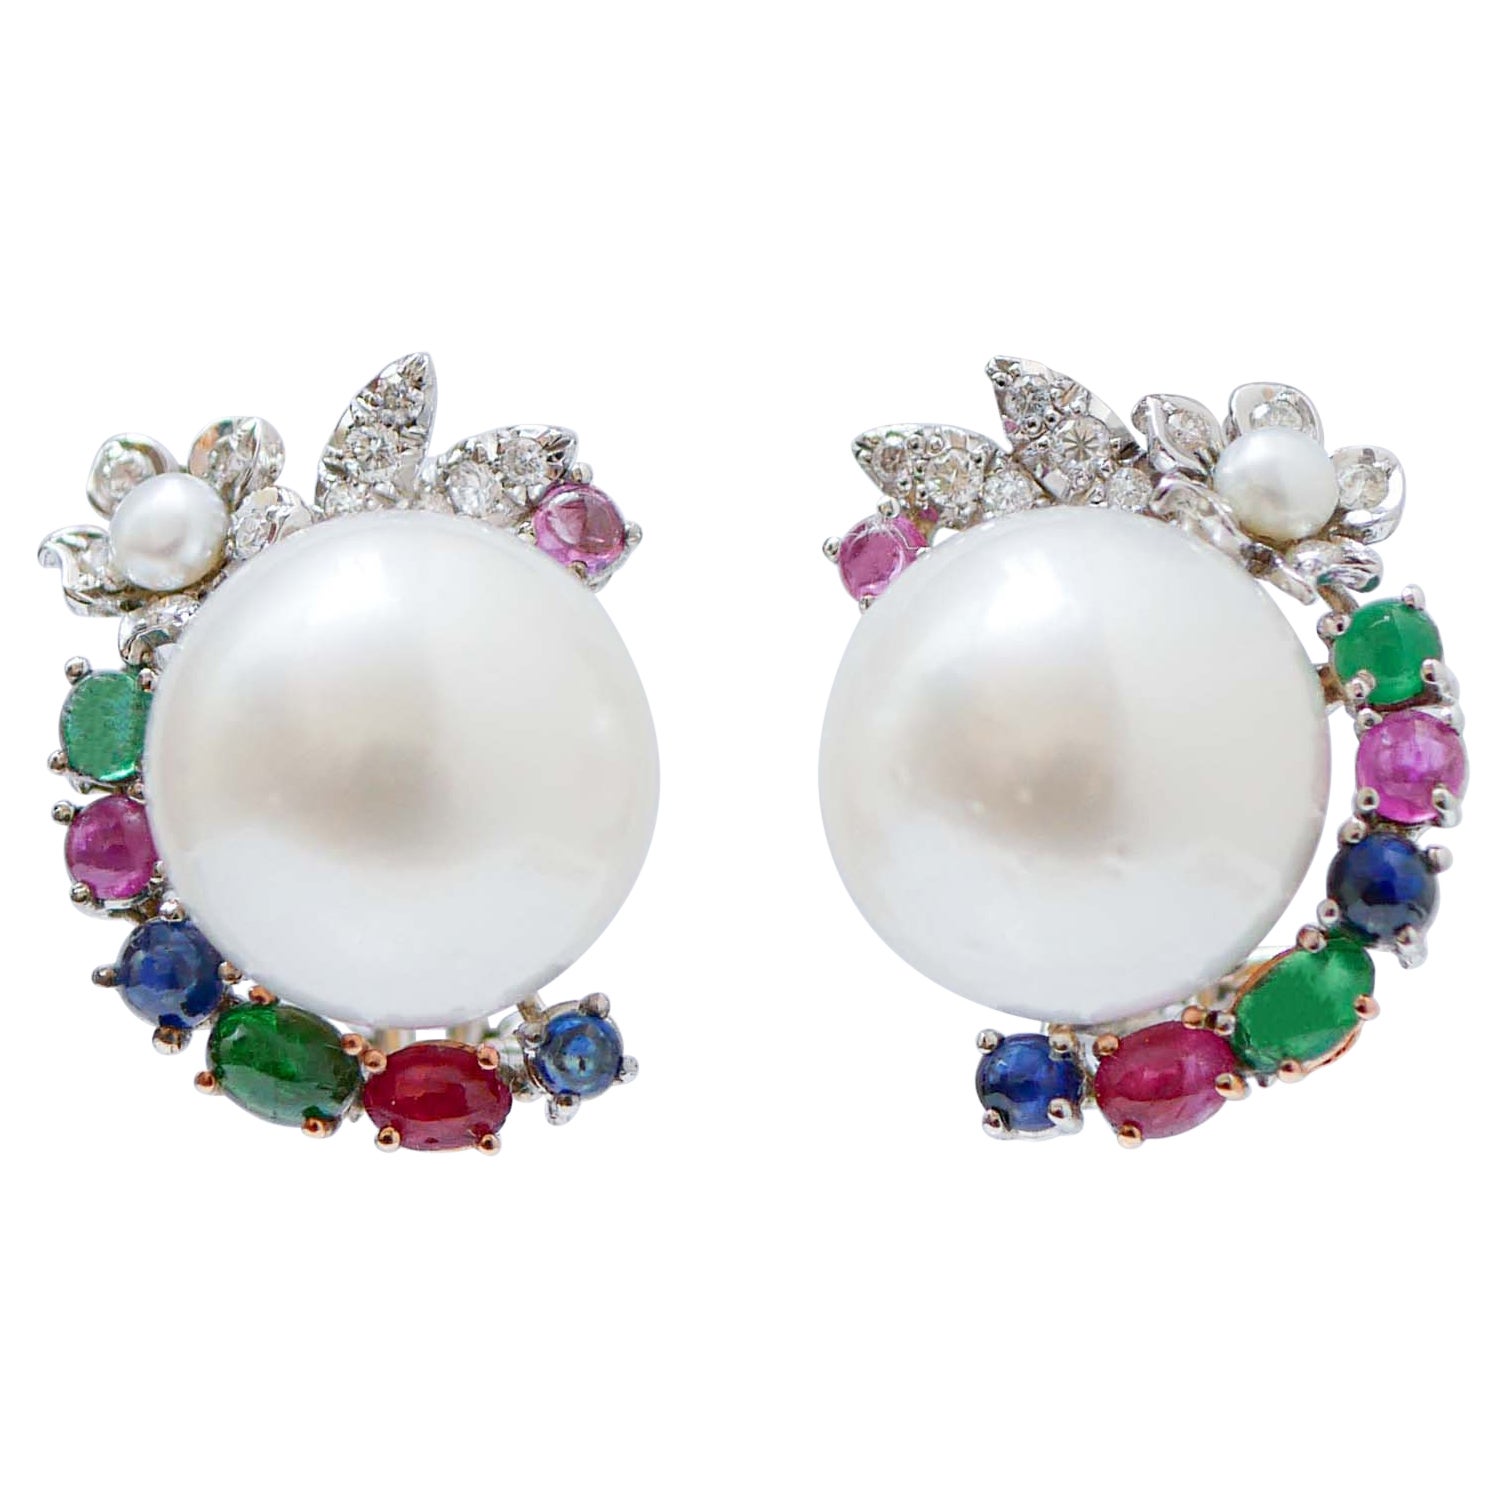 South-Sea Pearls, Rubies, Emeralds, Sapphires, Diamonds, 18Kt White Gold Earring For Sale